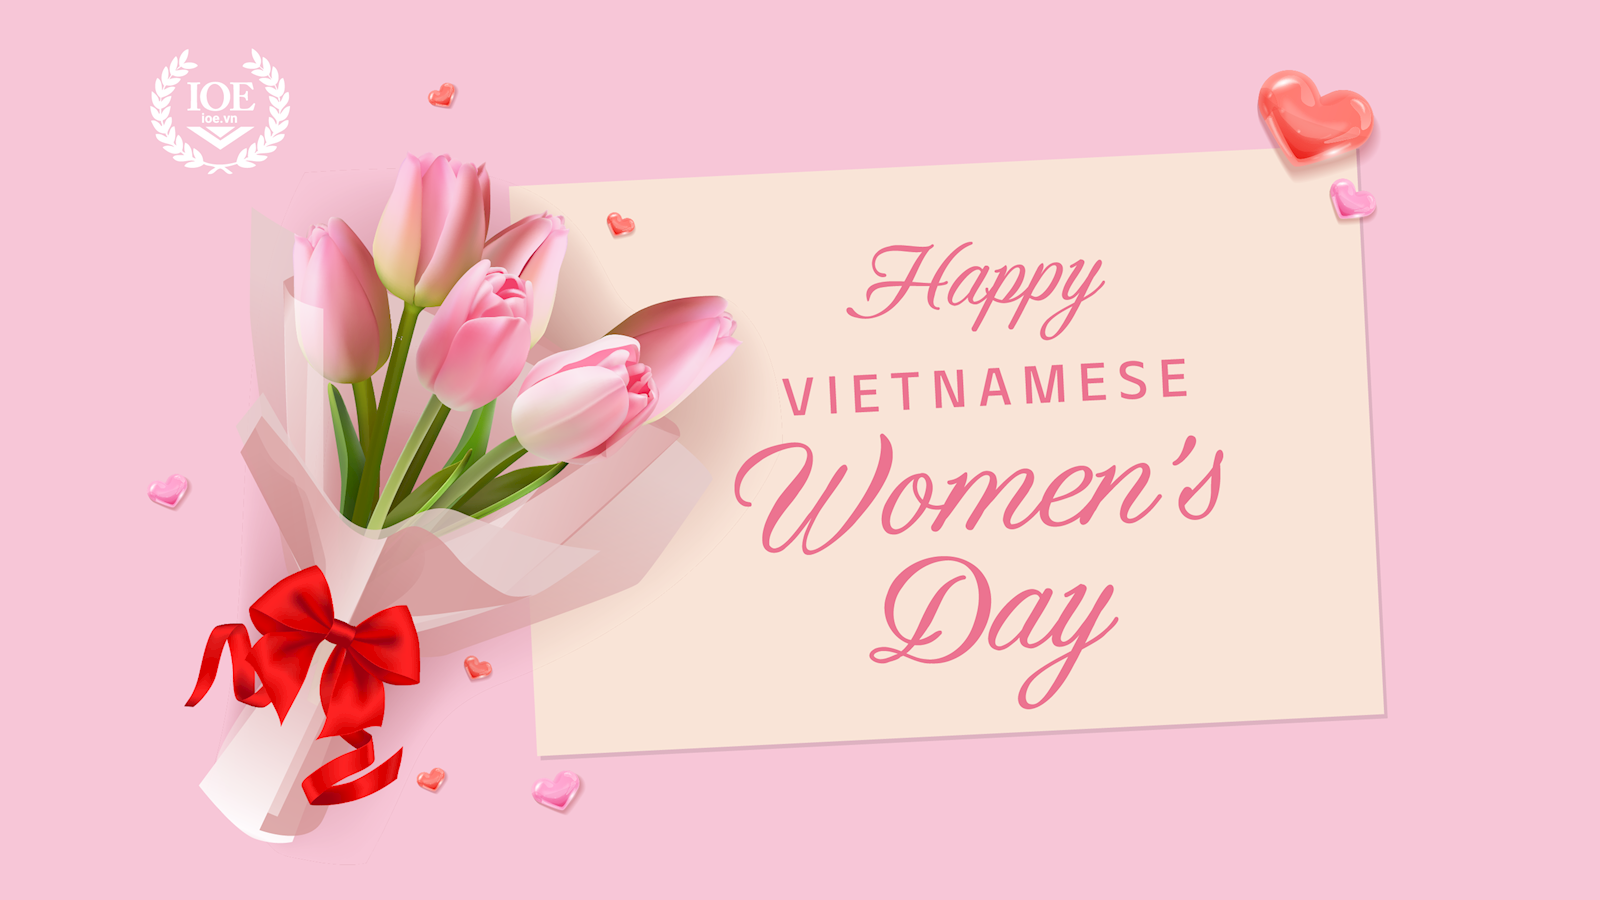 Happy Vietnamese Women’s Day: Sending the best wishes to our beloved women